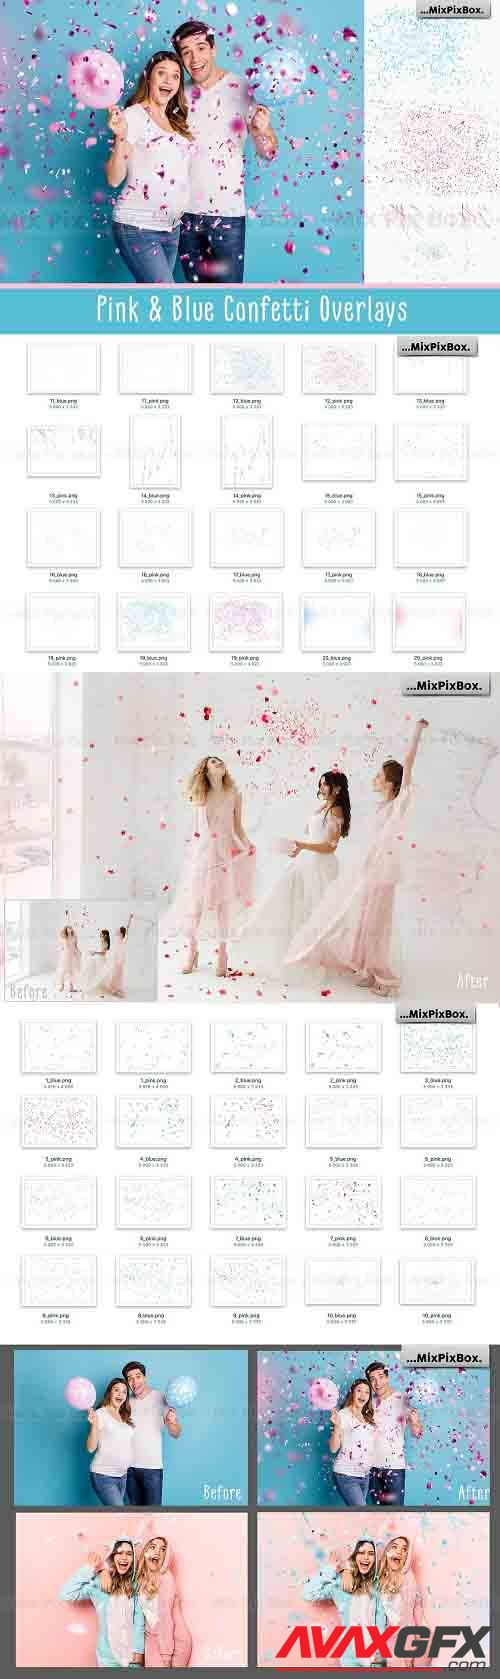 Pink and Blue Confetti Overlays - 6032880